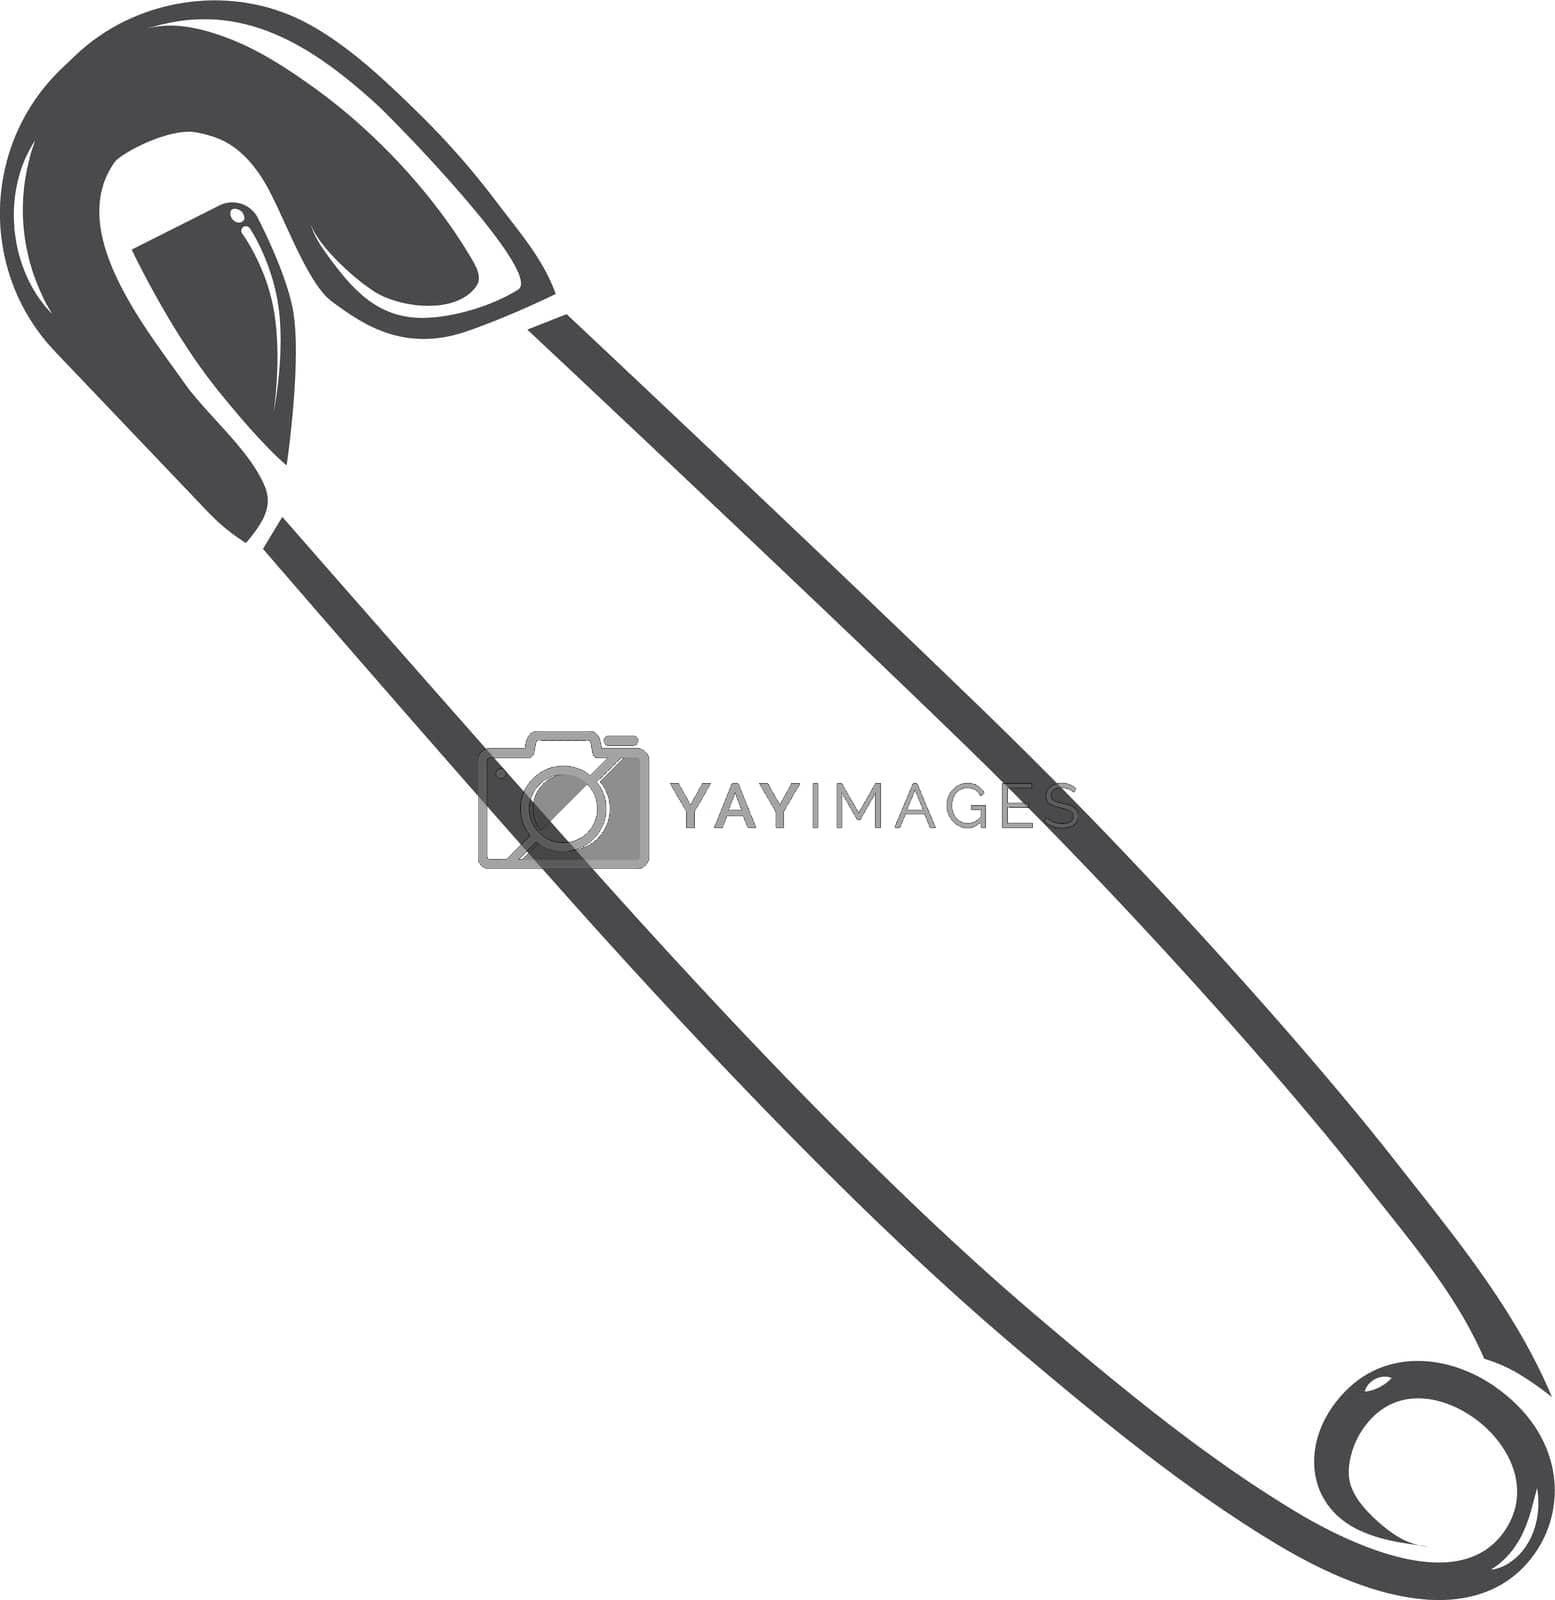 Royalty free image of Safety pin icon. Metal clasp fastener black symbol by MicroOne